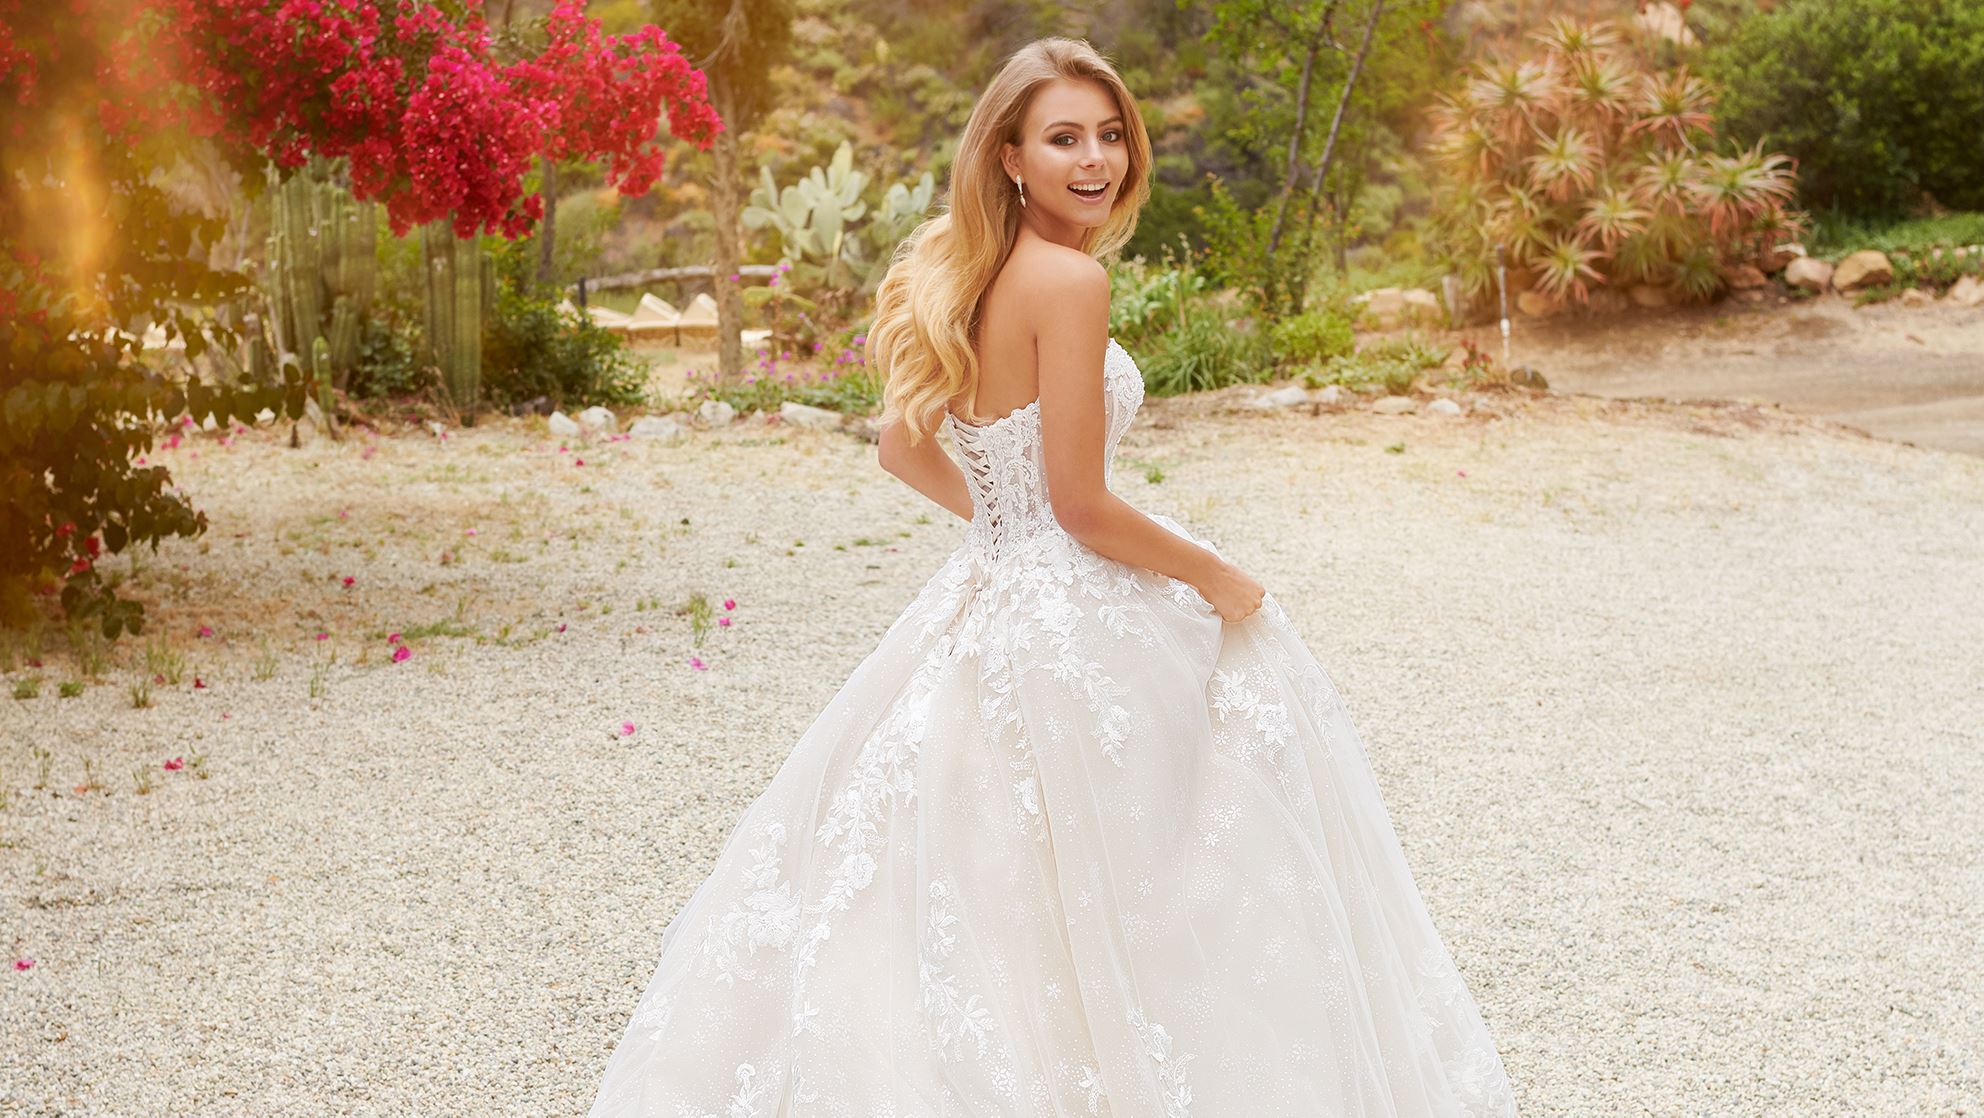 Blonde bride laughing in white ball gown wedding dress